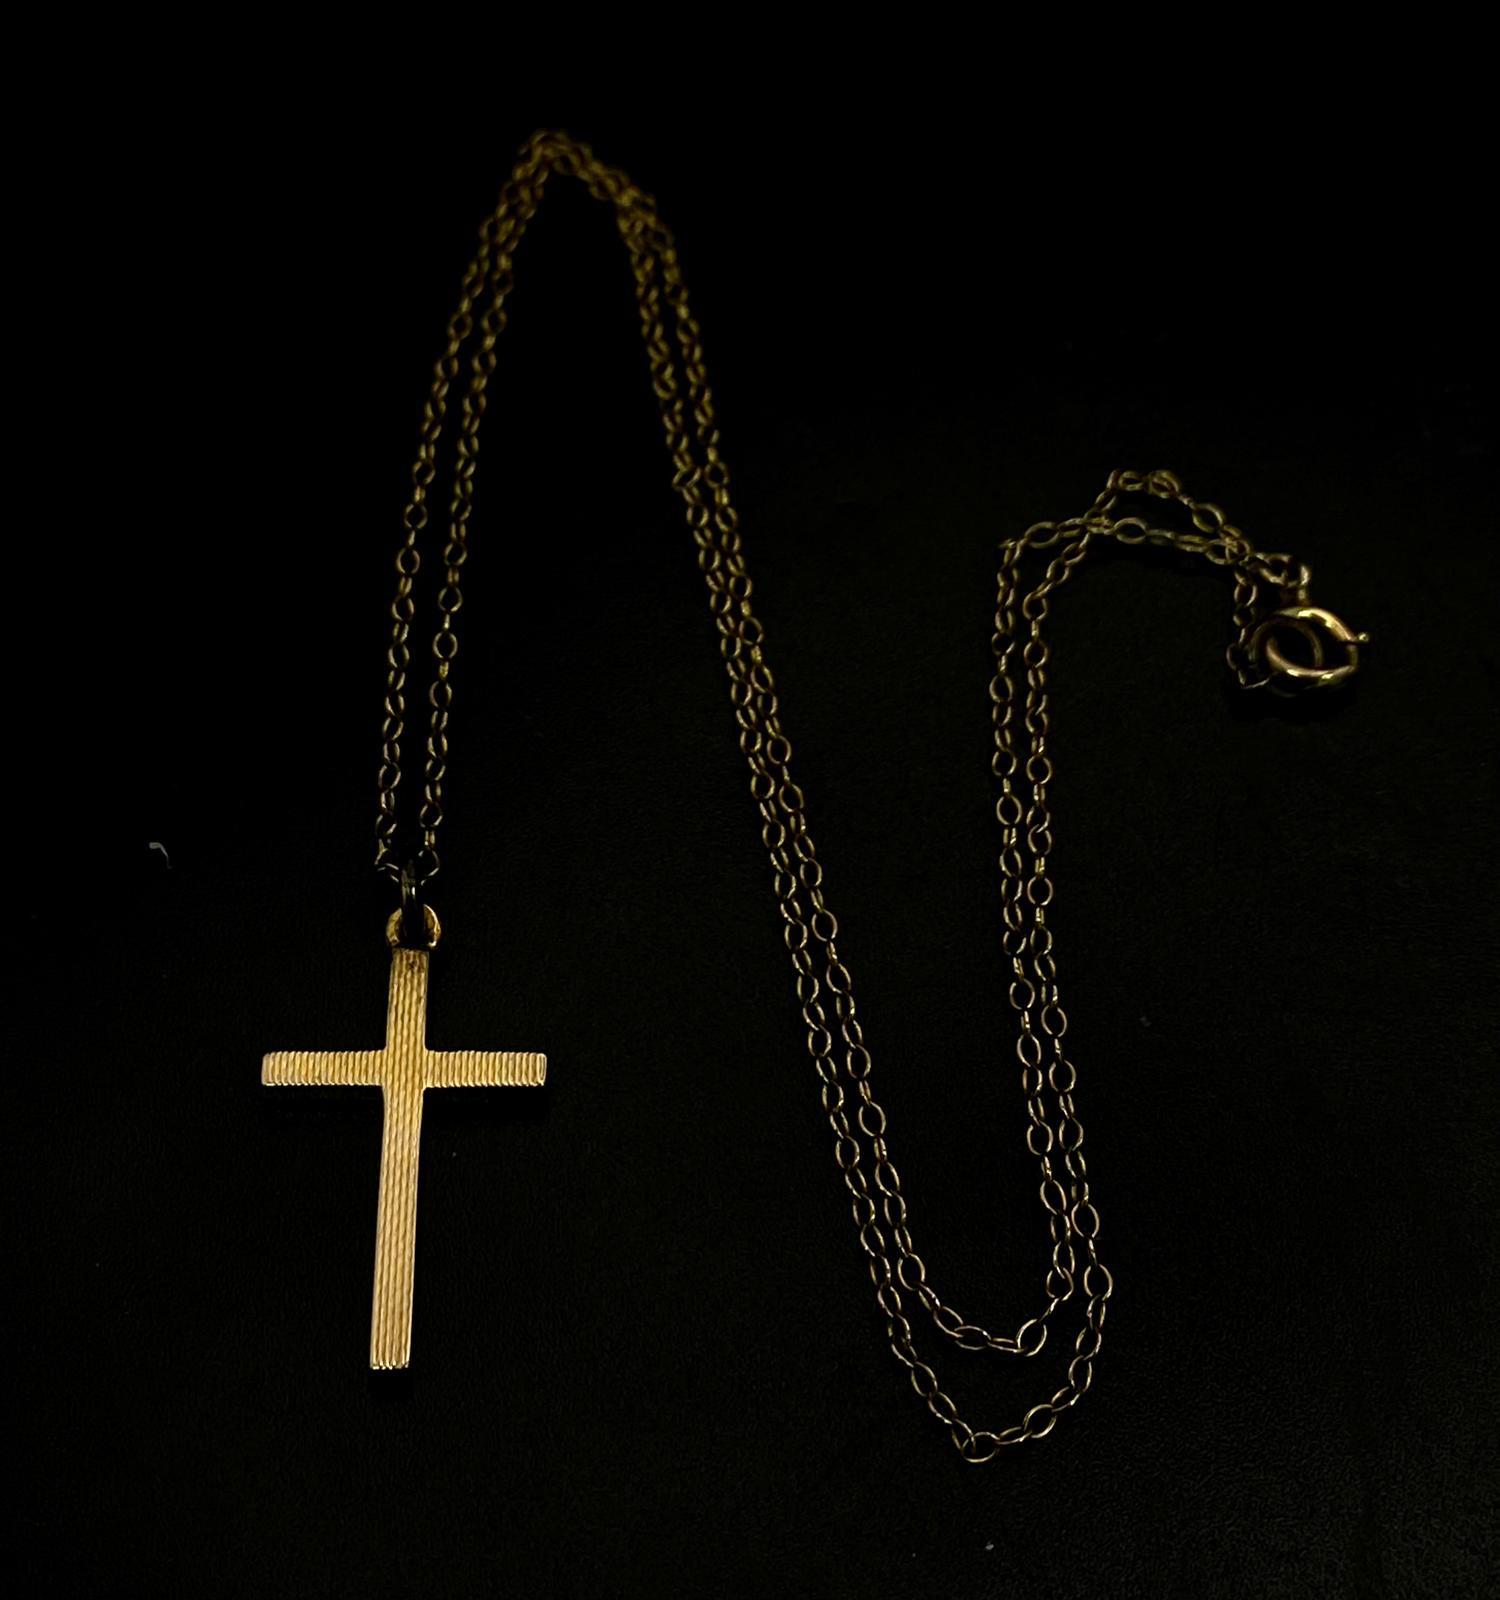 9k yellow gold patterned cross with matching 18"" belcher chain Weight: 2.9g - Image 3 of 5